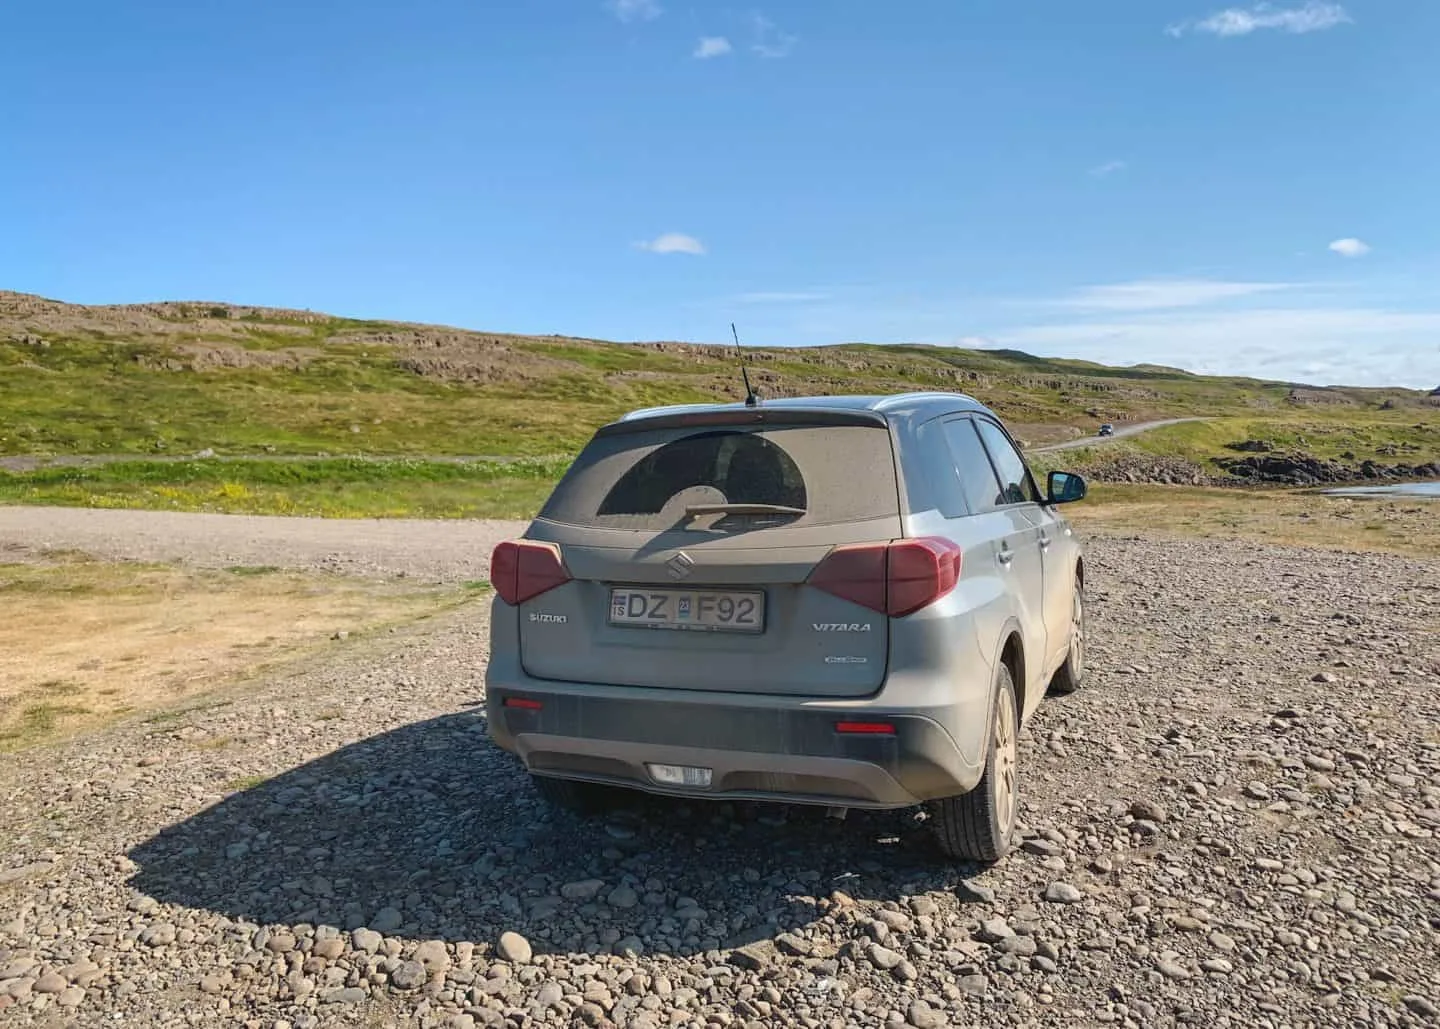 4x4 car rental for driving on Iceland's F roads